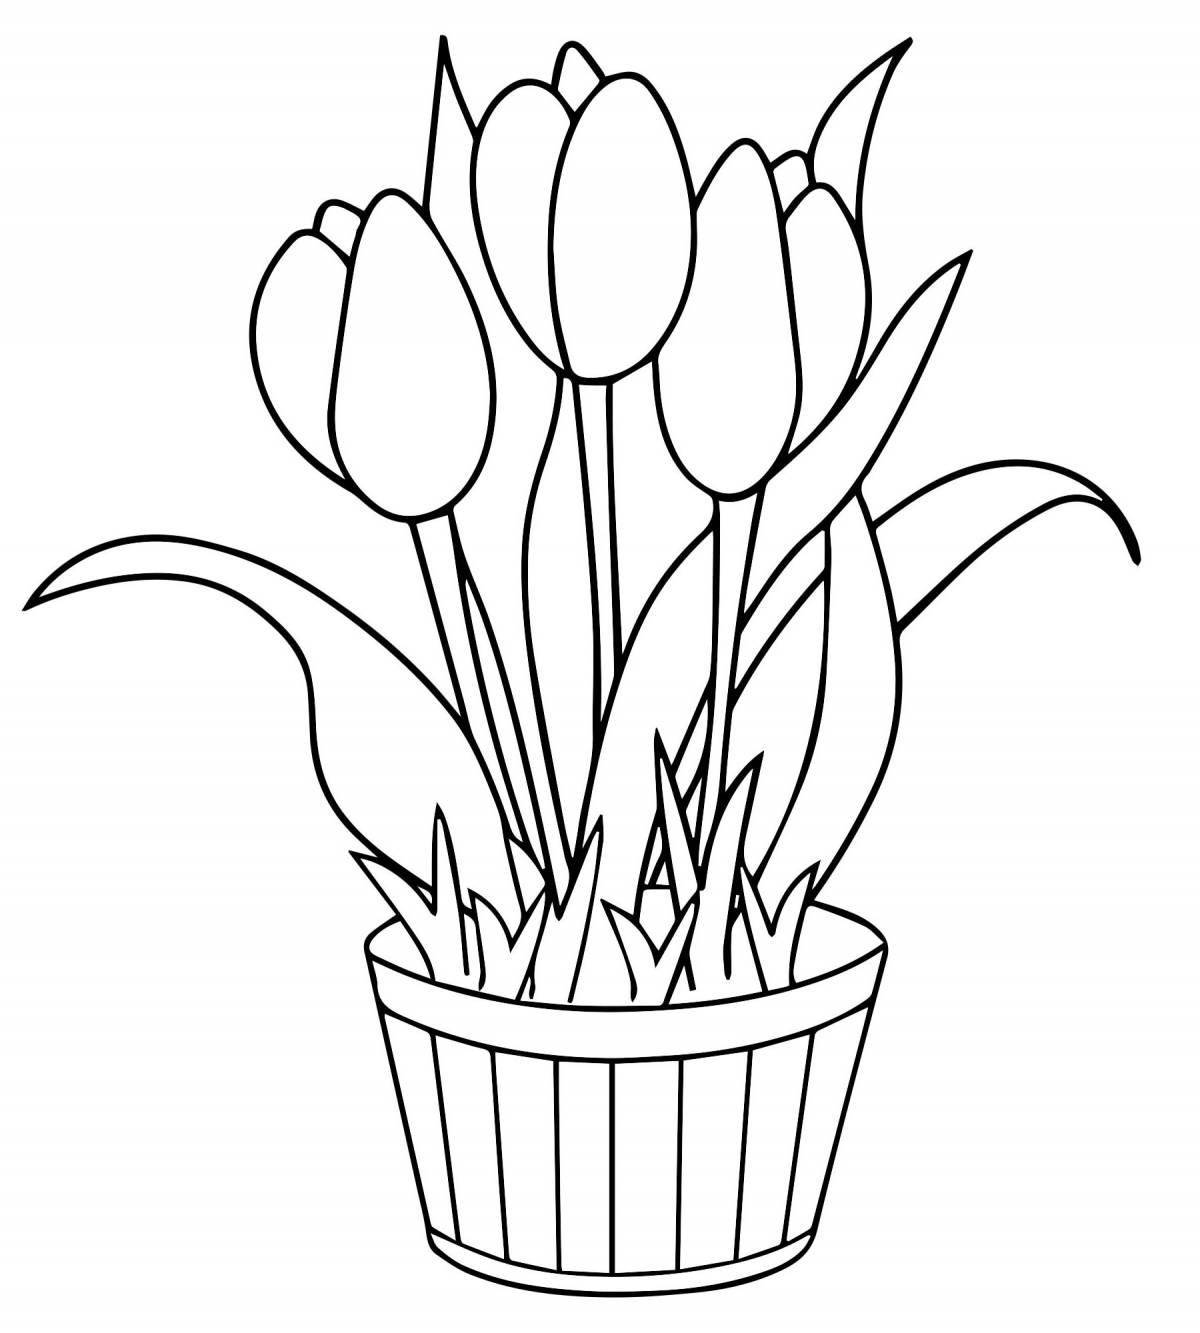 A wonderful flower coloring book for beginners